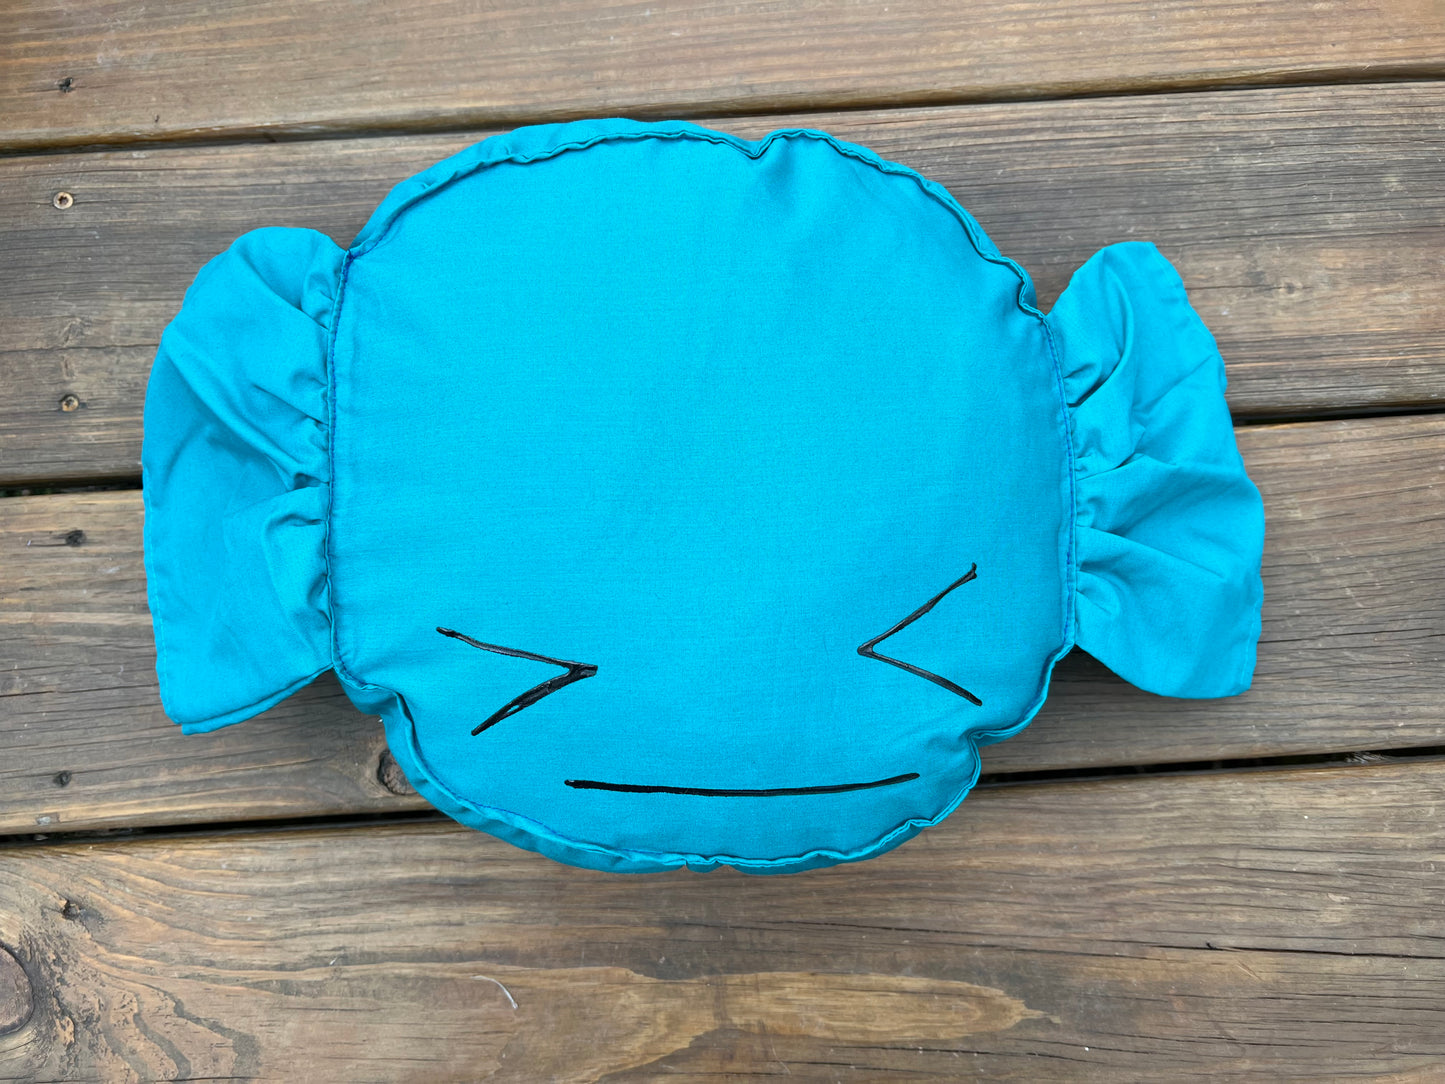 Blue Raspberry candy pillow, against a wood background, with a painted face.